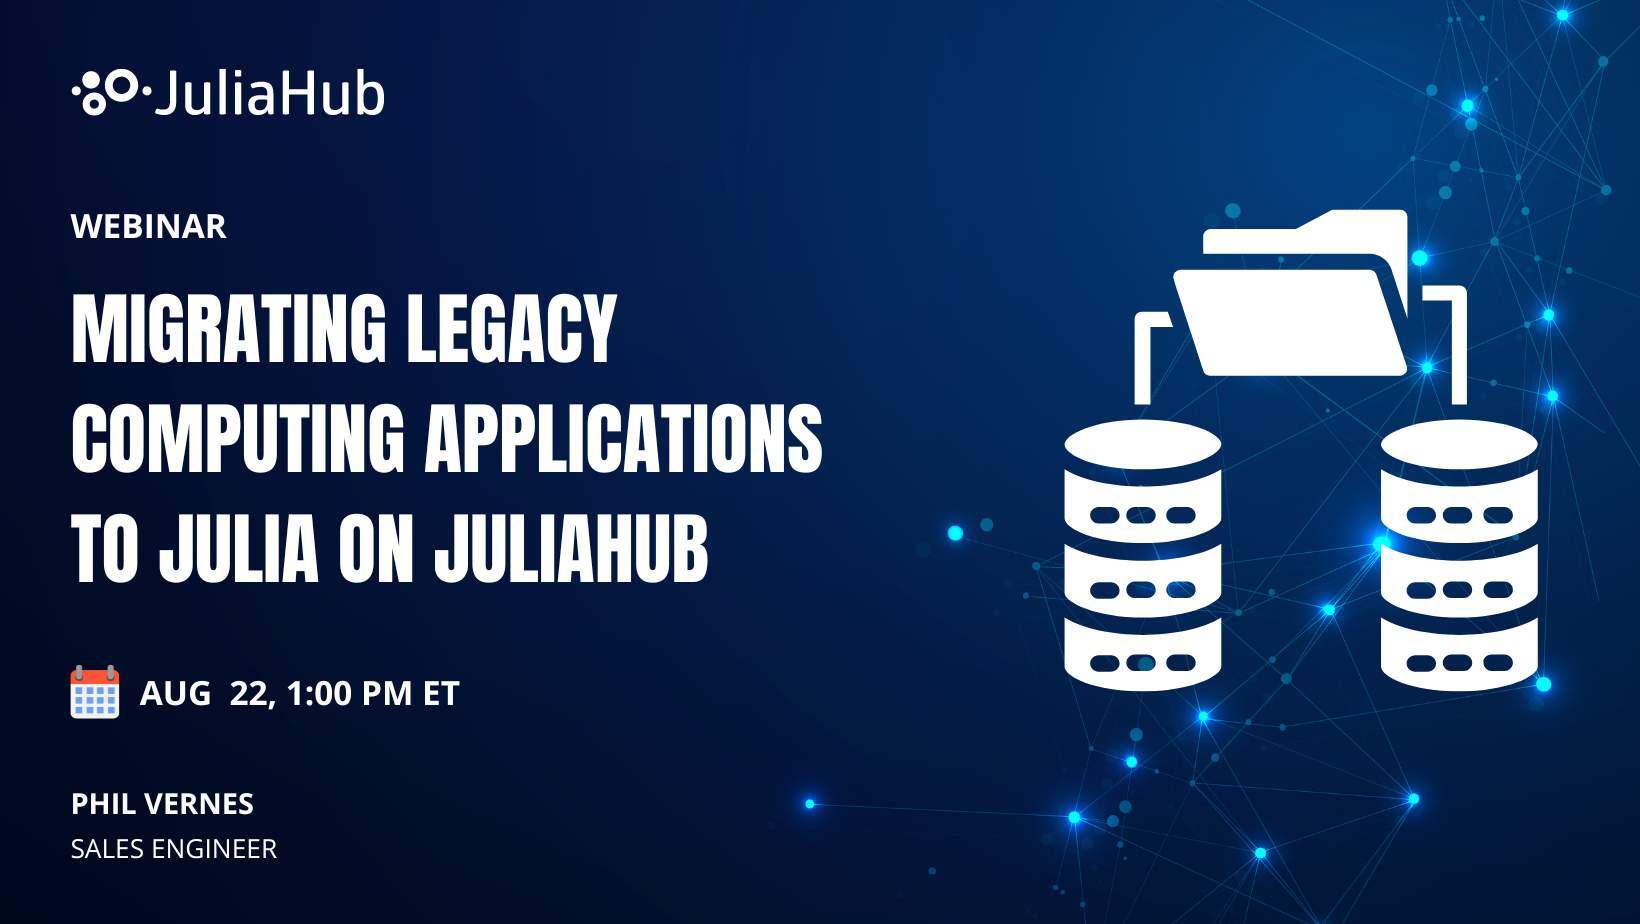 Webinar on migrating legacy apps to JuliaHub with live demo.